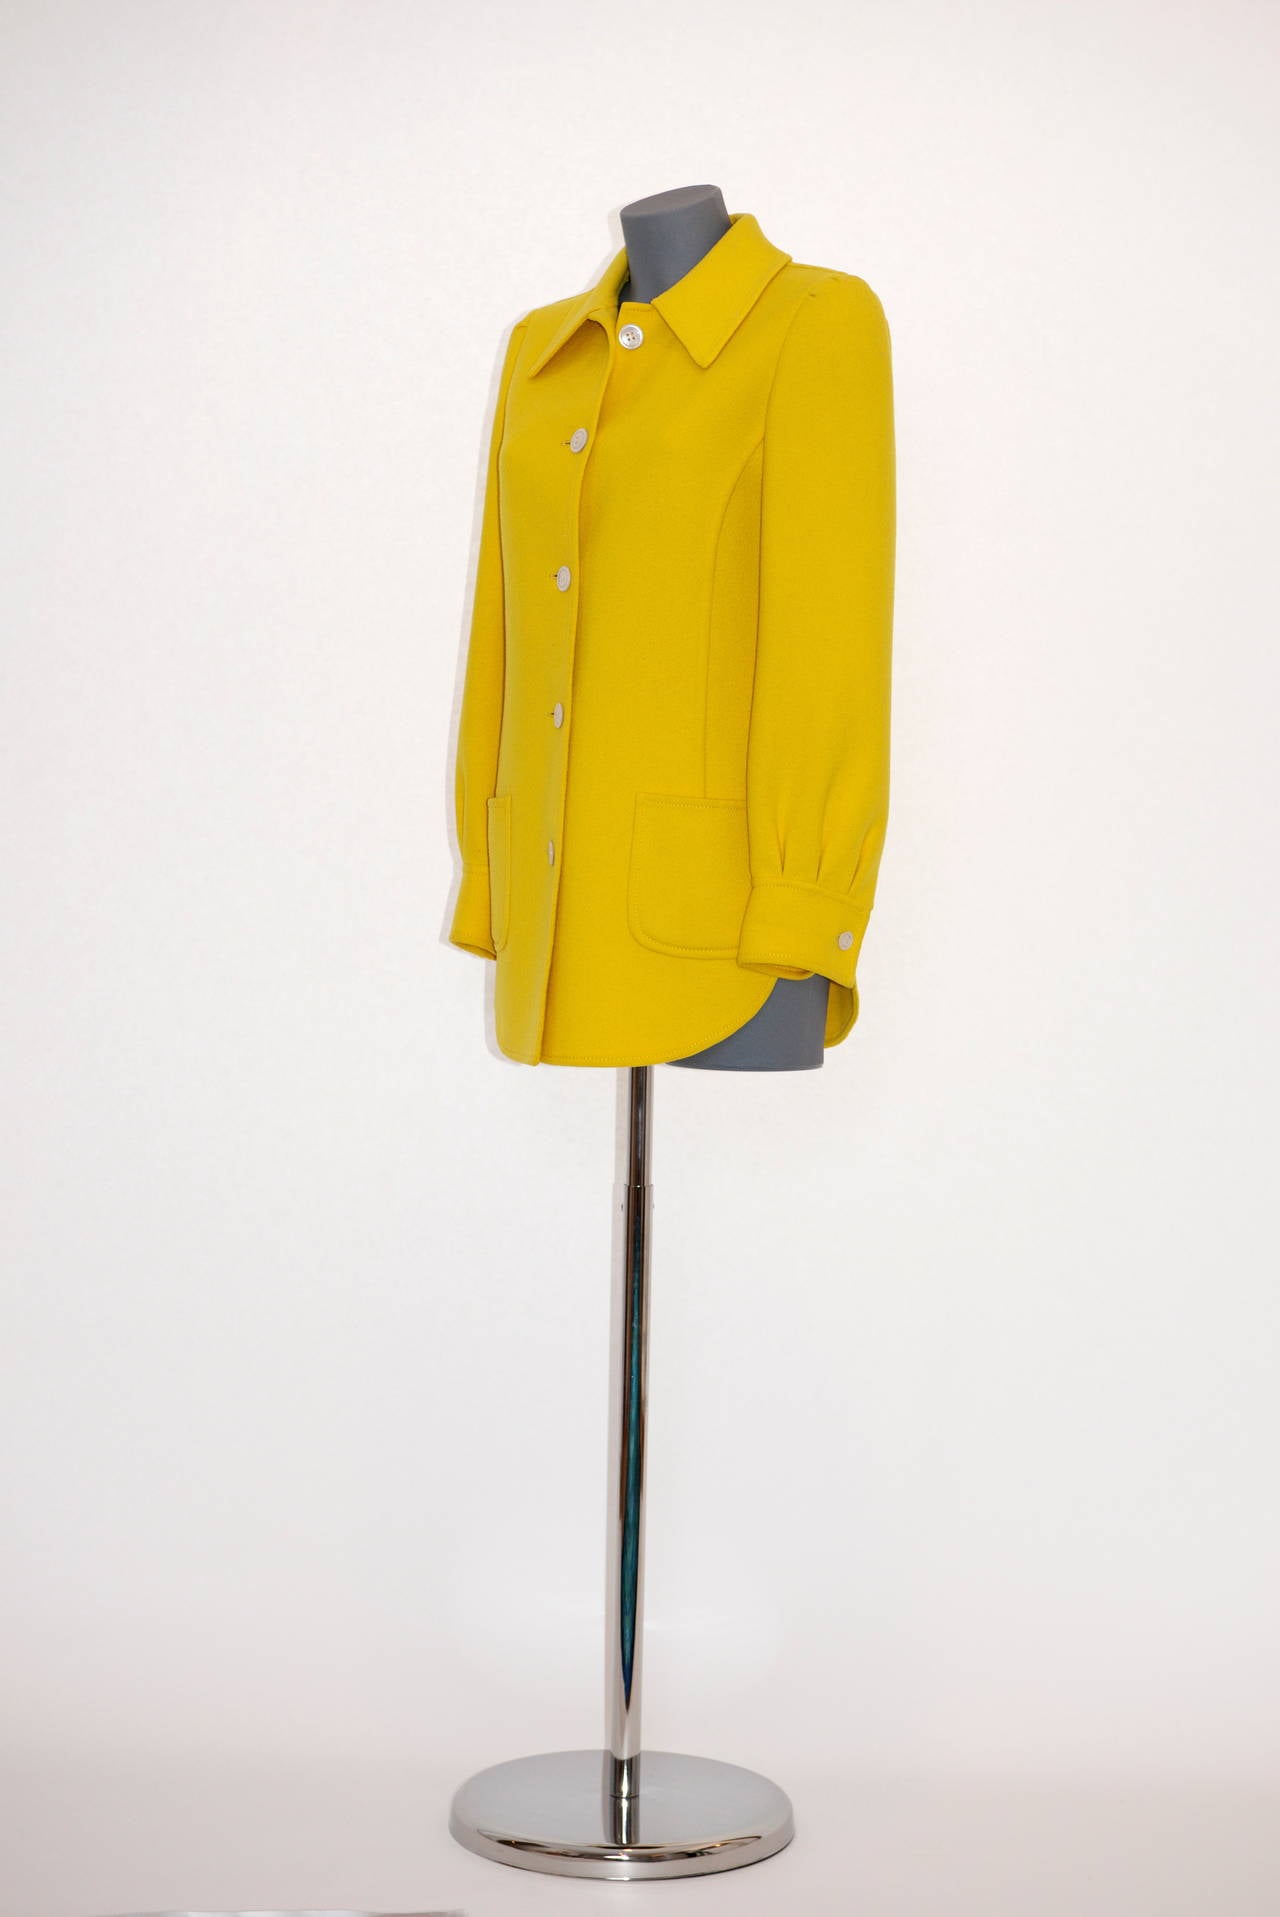 Rare early double face 70's bright yellow Valentino shirt-jacket. Typical 70's pointed collar and front patch pockets. The jacket fastens with five mother-of-pearl buttons. Unlined. Truly a fabulous and unusual piece of outwear, thanks to both its